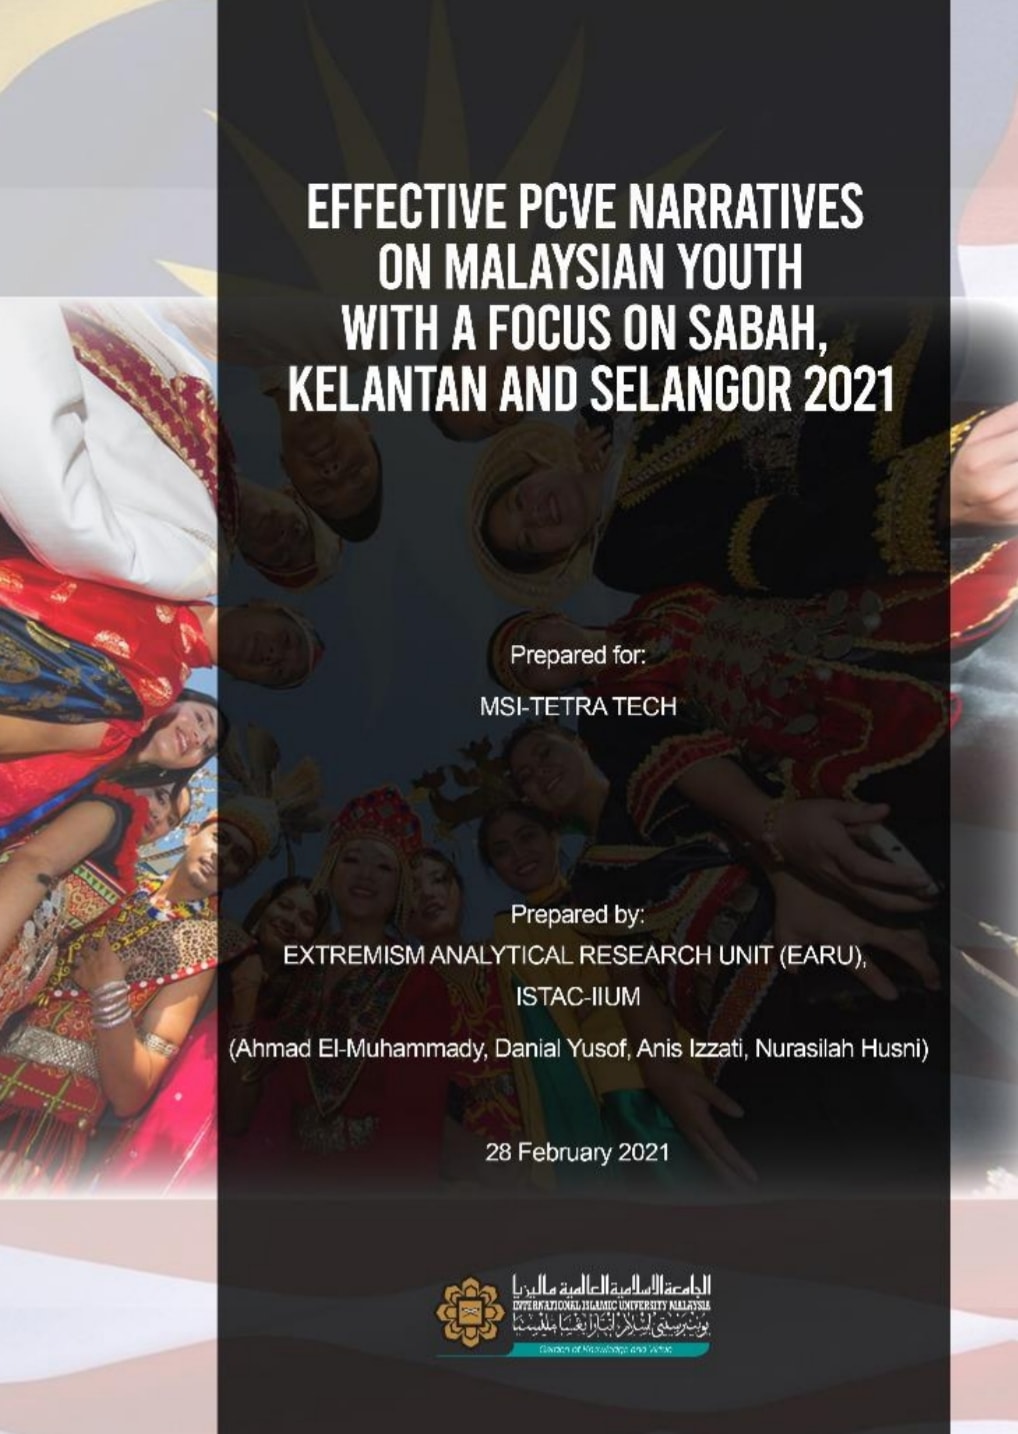 Effective Preventing and Countering Violent Extremism (PCVE) Narratives on Malaysian Youth in Sabah, Kelantan and Selangor